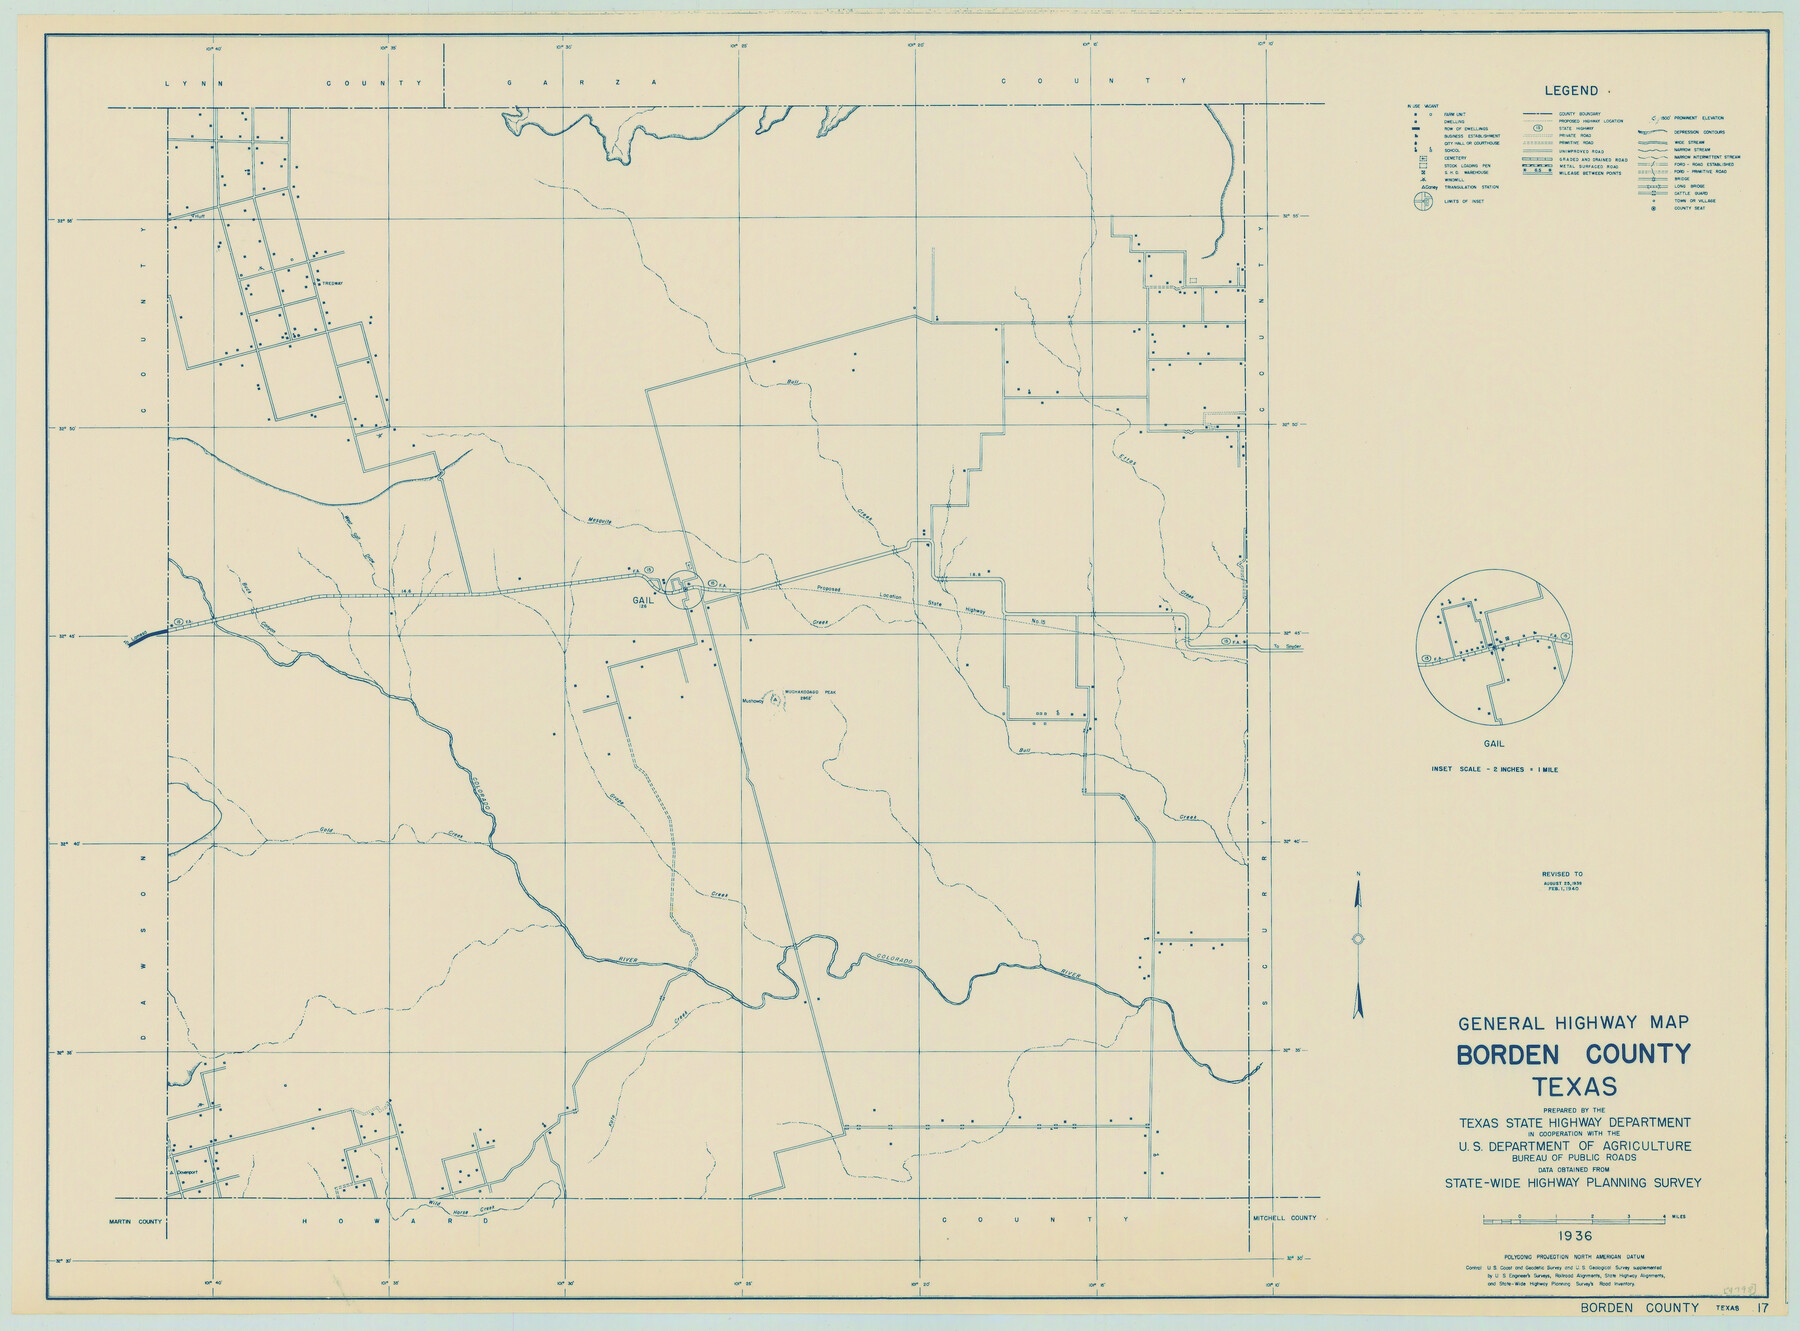 79021, General Highway Map, Borden County, Texas, Texas State Library and Archives